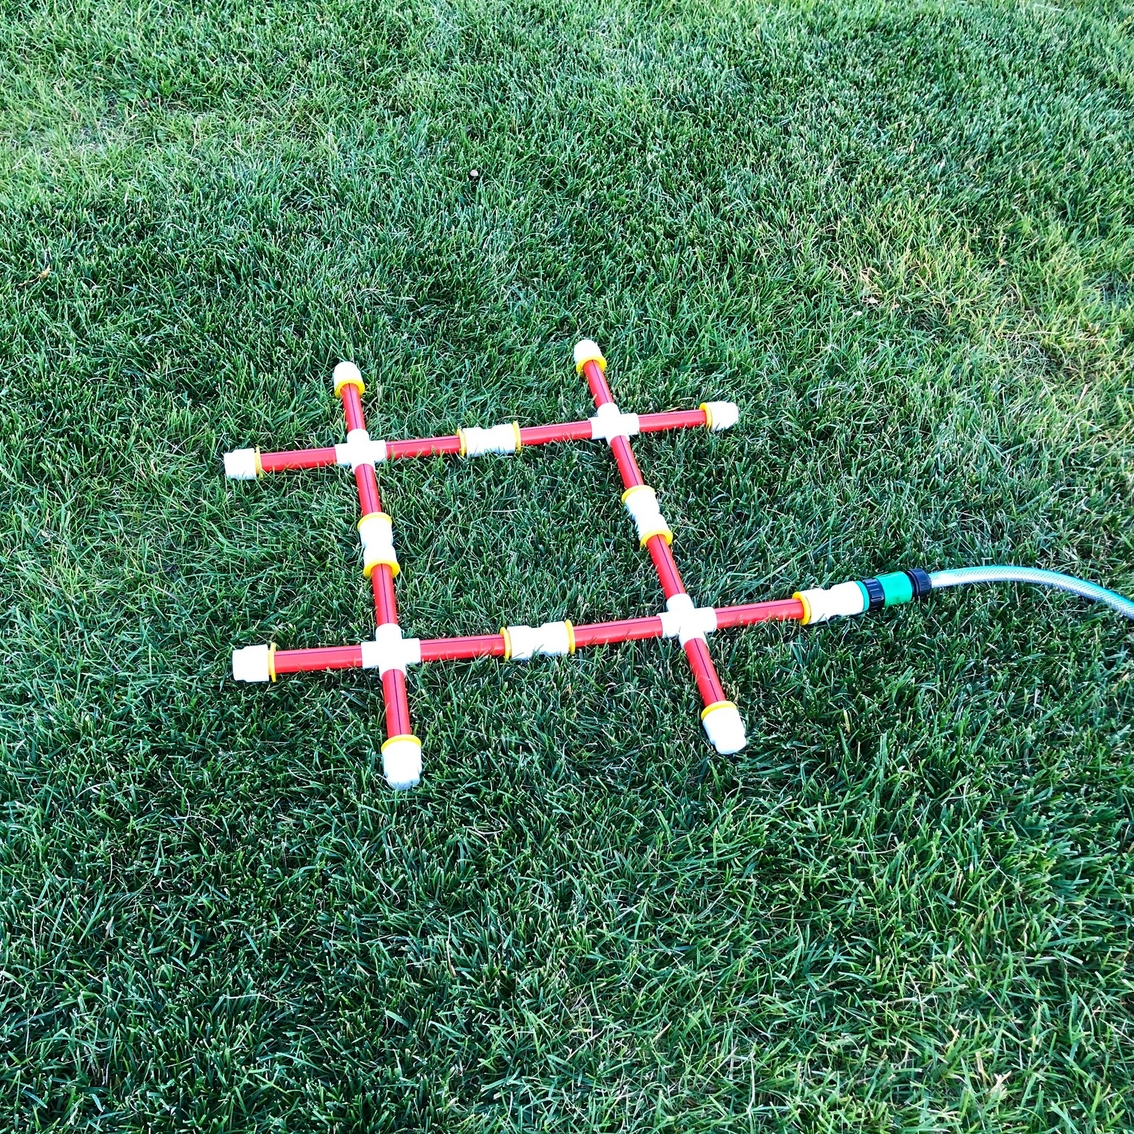 Funphix Sprinklers Set with Poles and Hose for Outdoor Water Fun - Image 4 of 5